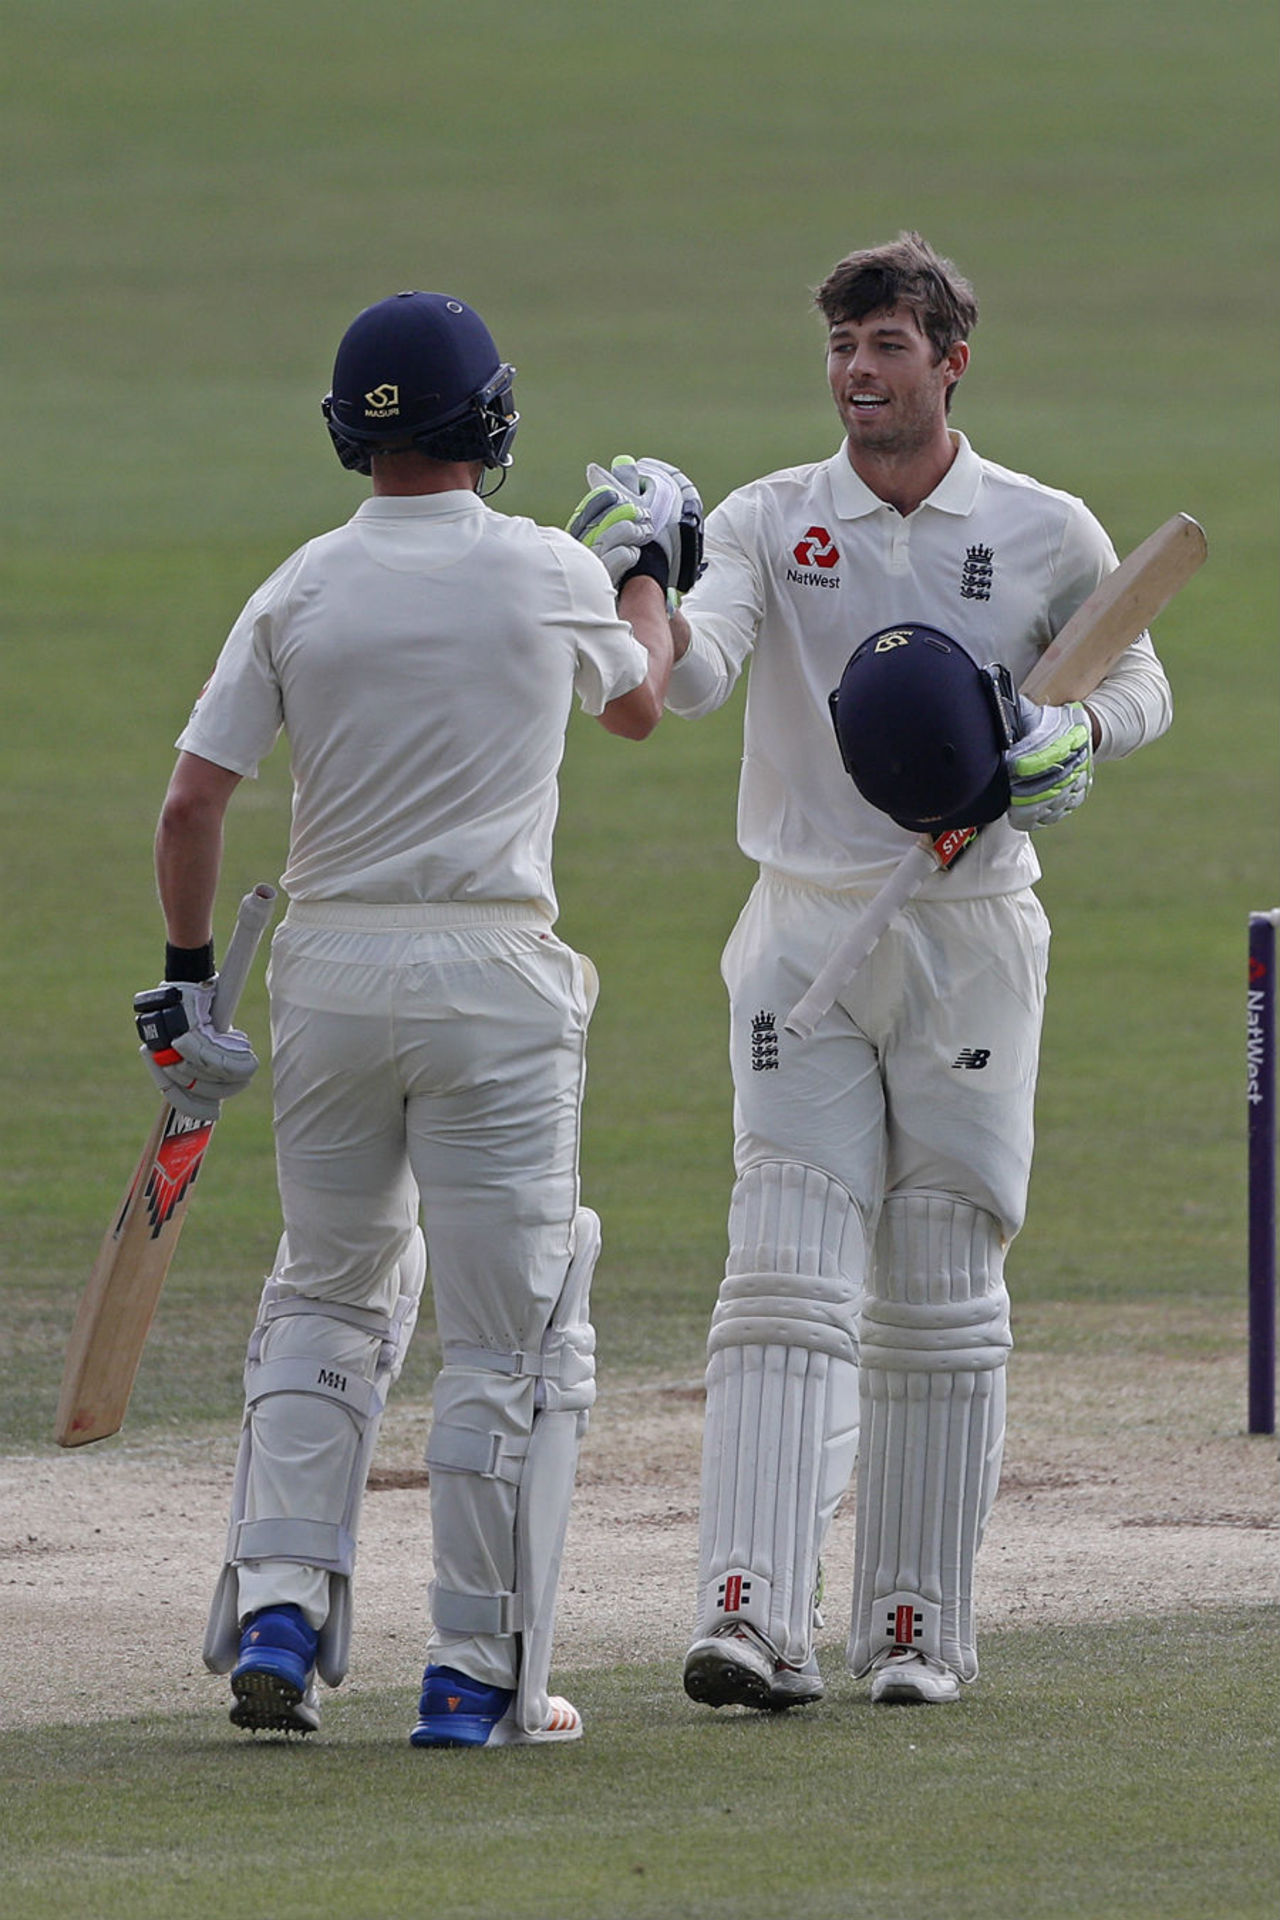 Ben Foakes celebrates reaching his hundred for England Lions, England Lions v South Africa A, unofficial Test, Canterbury, 2nd day, July 22, 2017